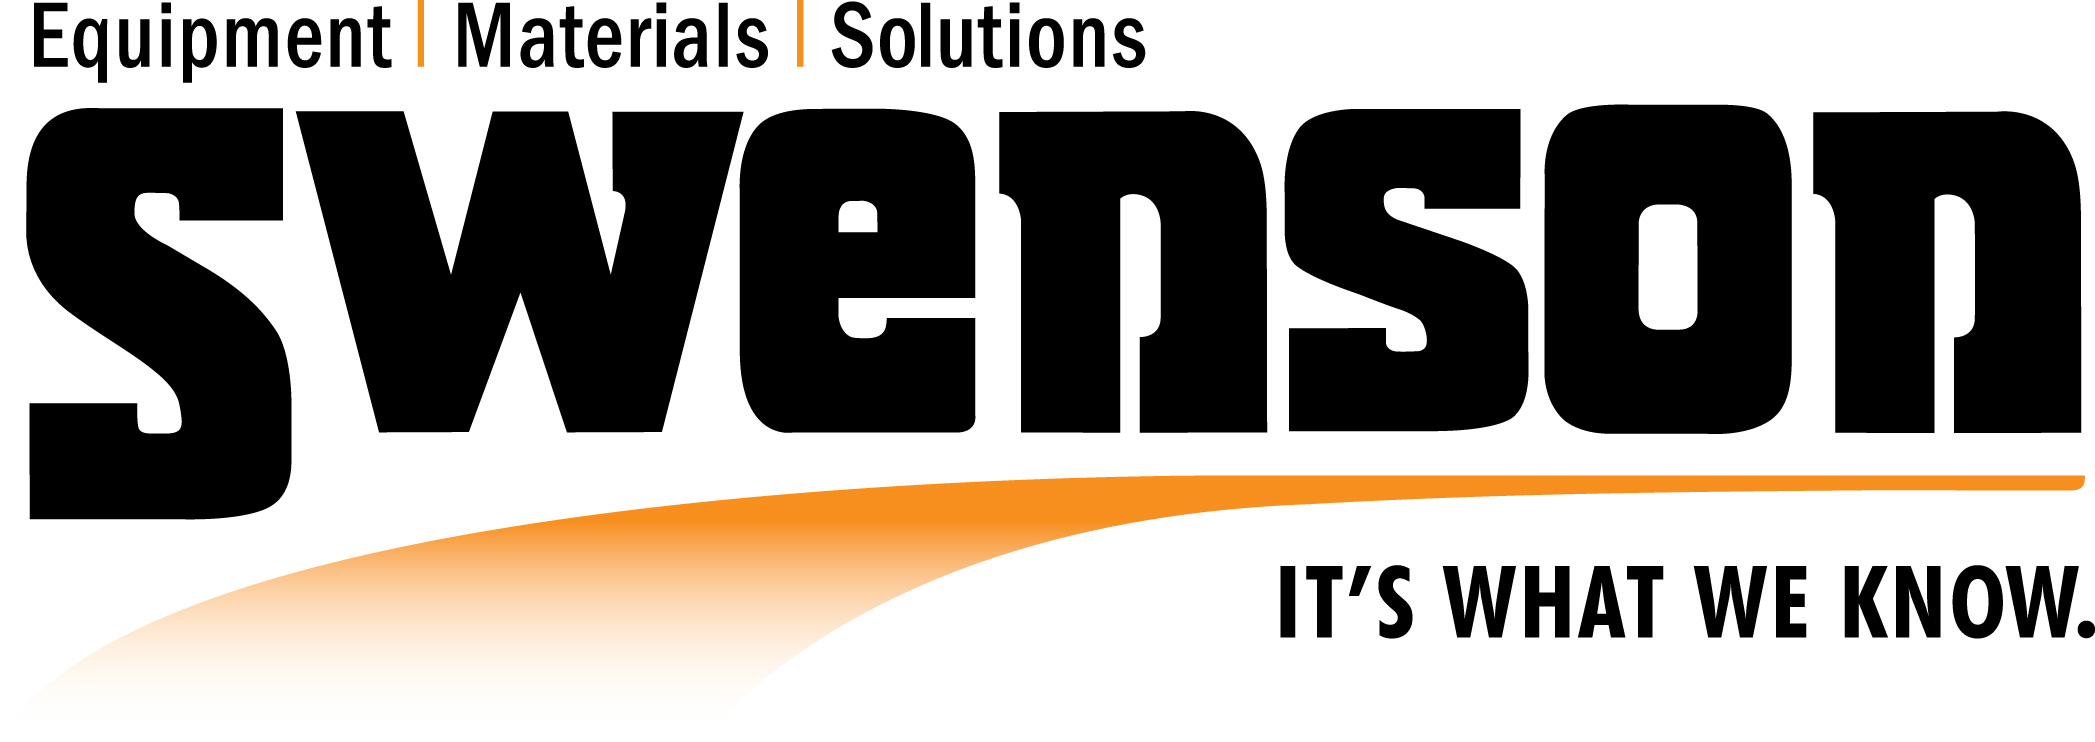 Swenson Products